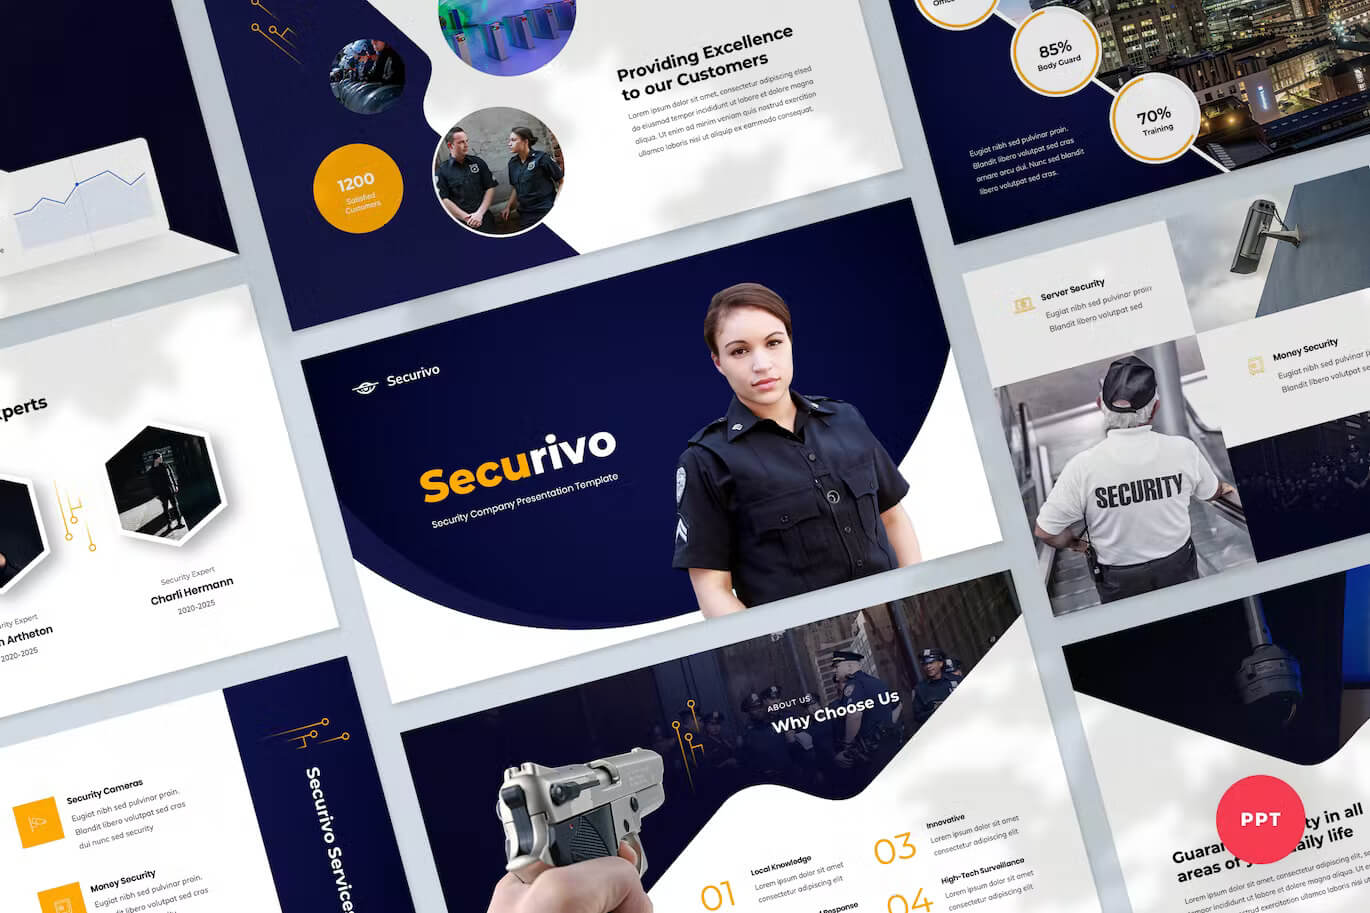 A picture with many Powerpoint templates at a slight angle "Securivo".